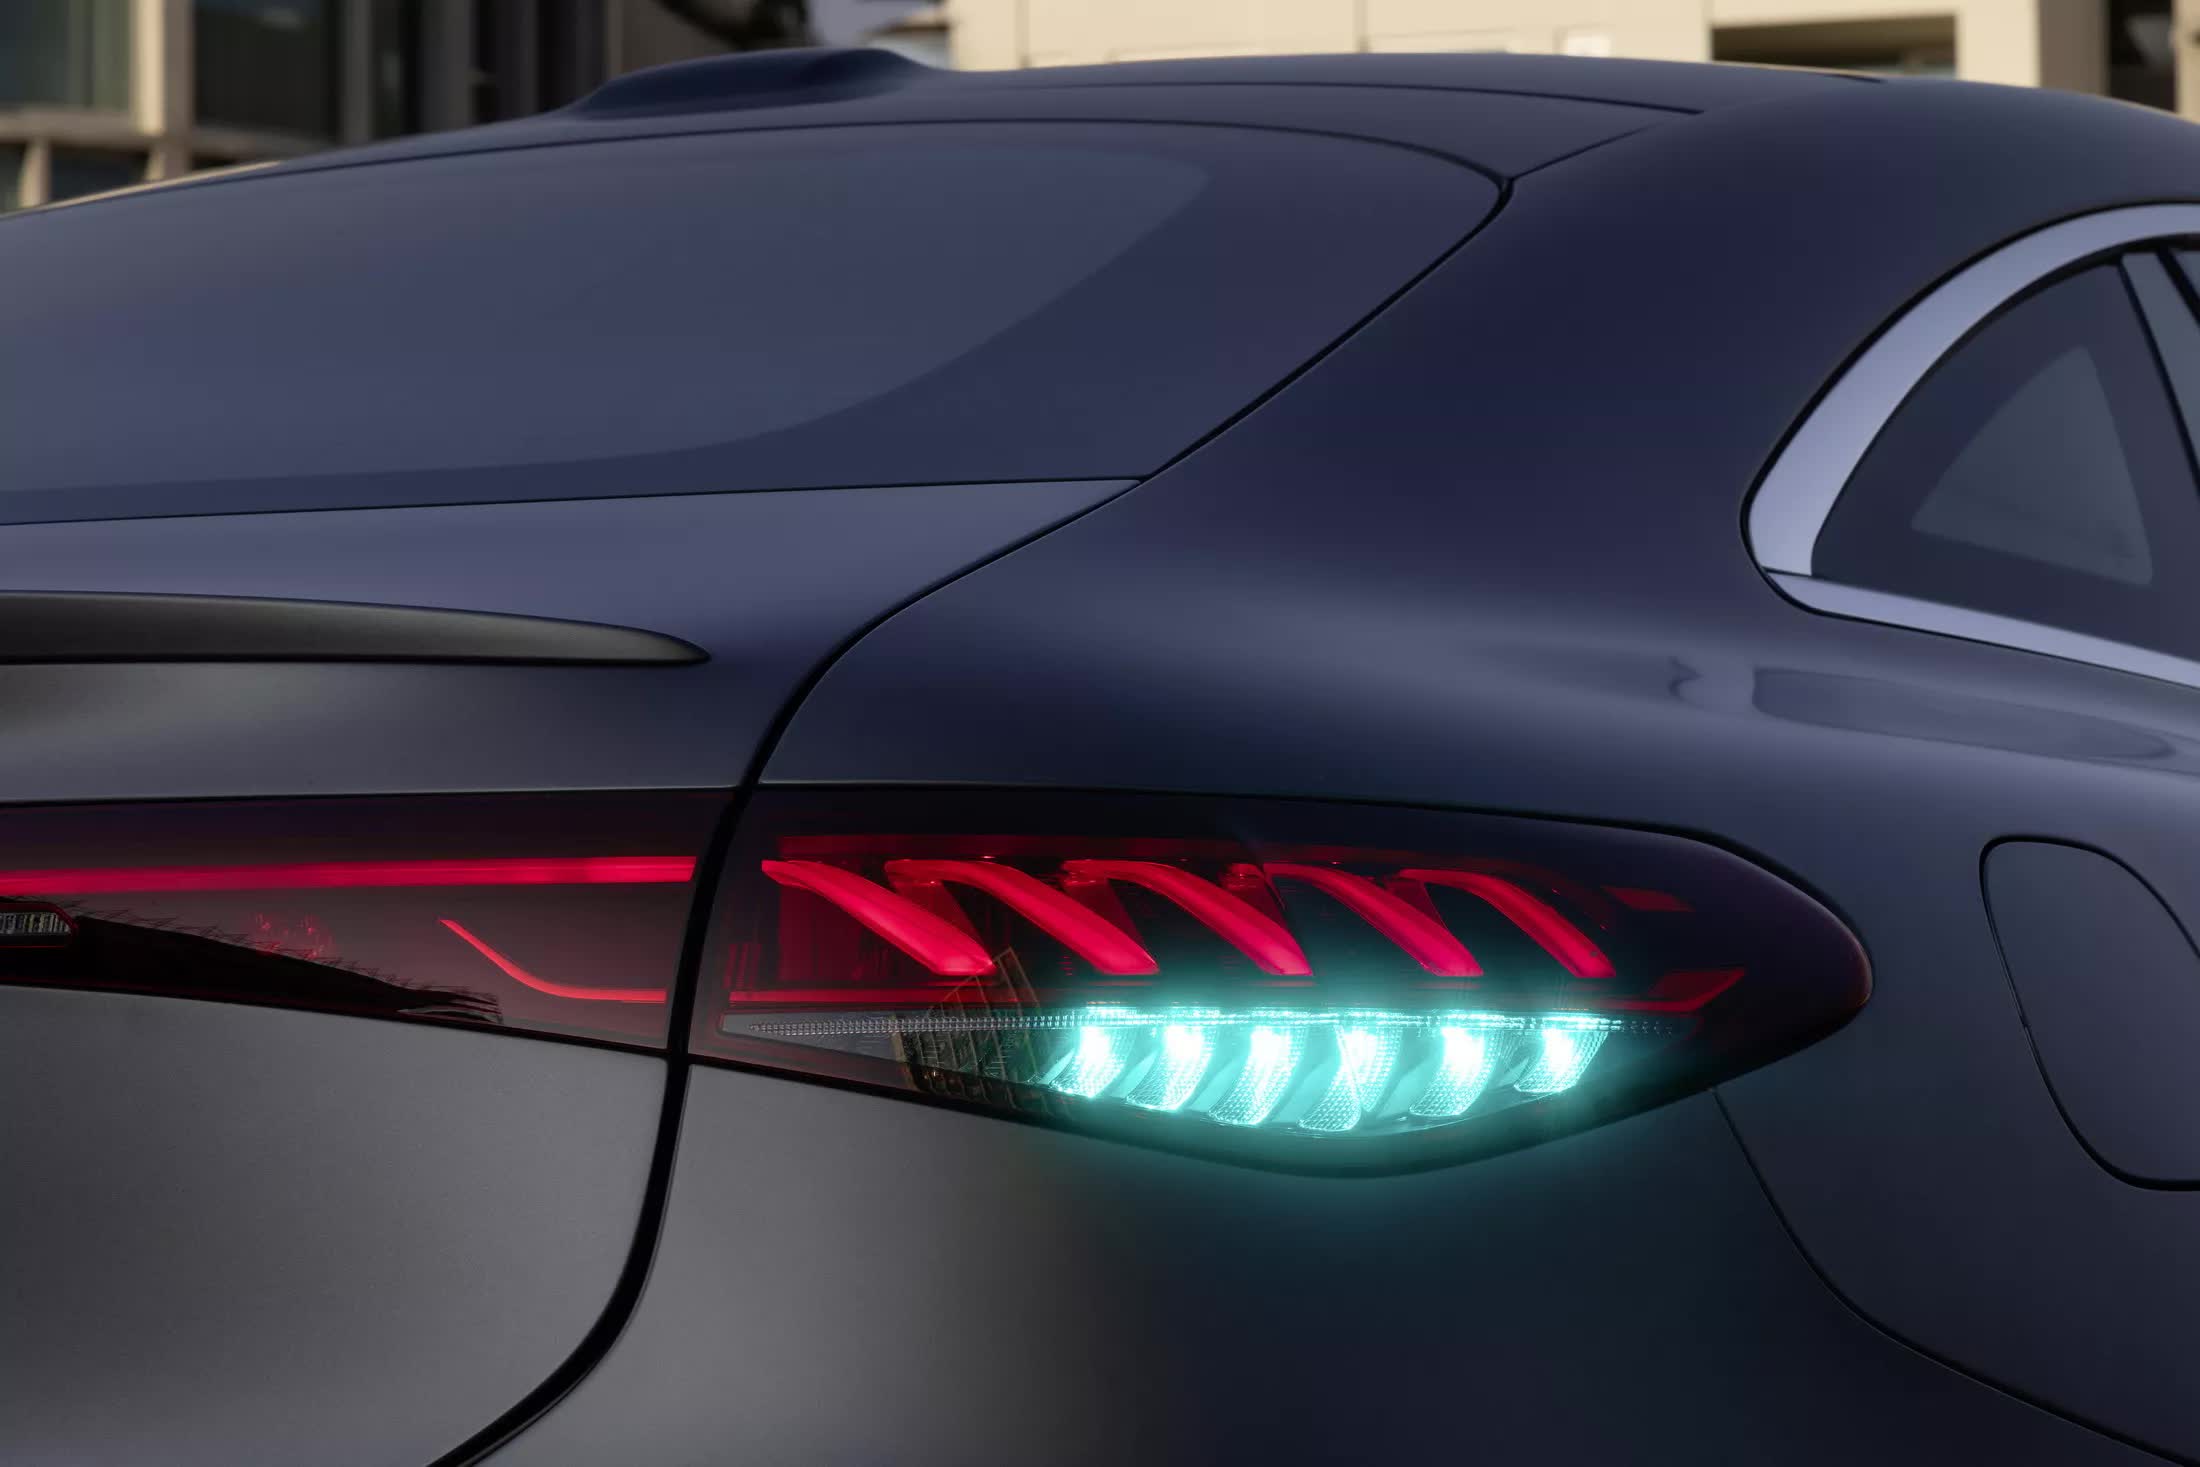 Mercedes-Benz debuts turquoise exterior lights to indicate the car is self-driving